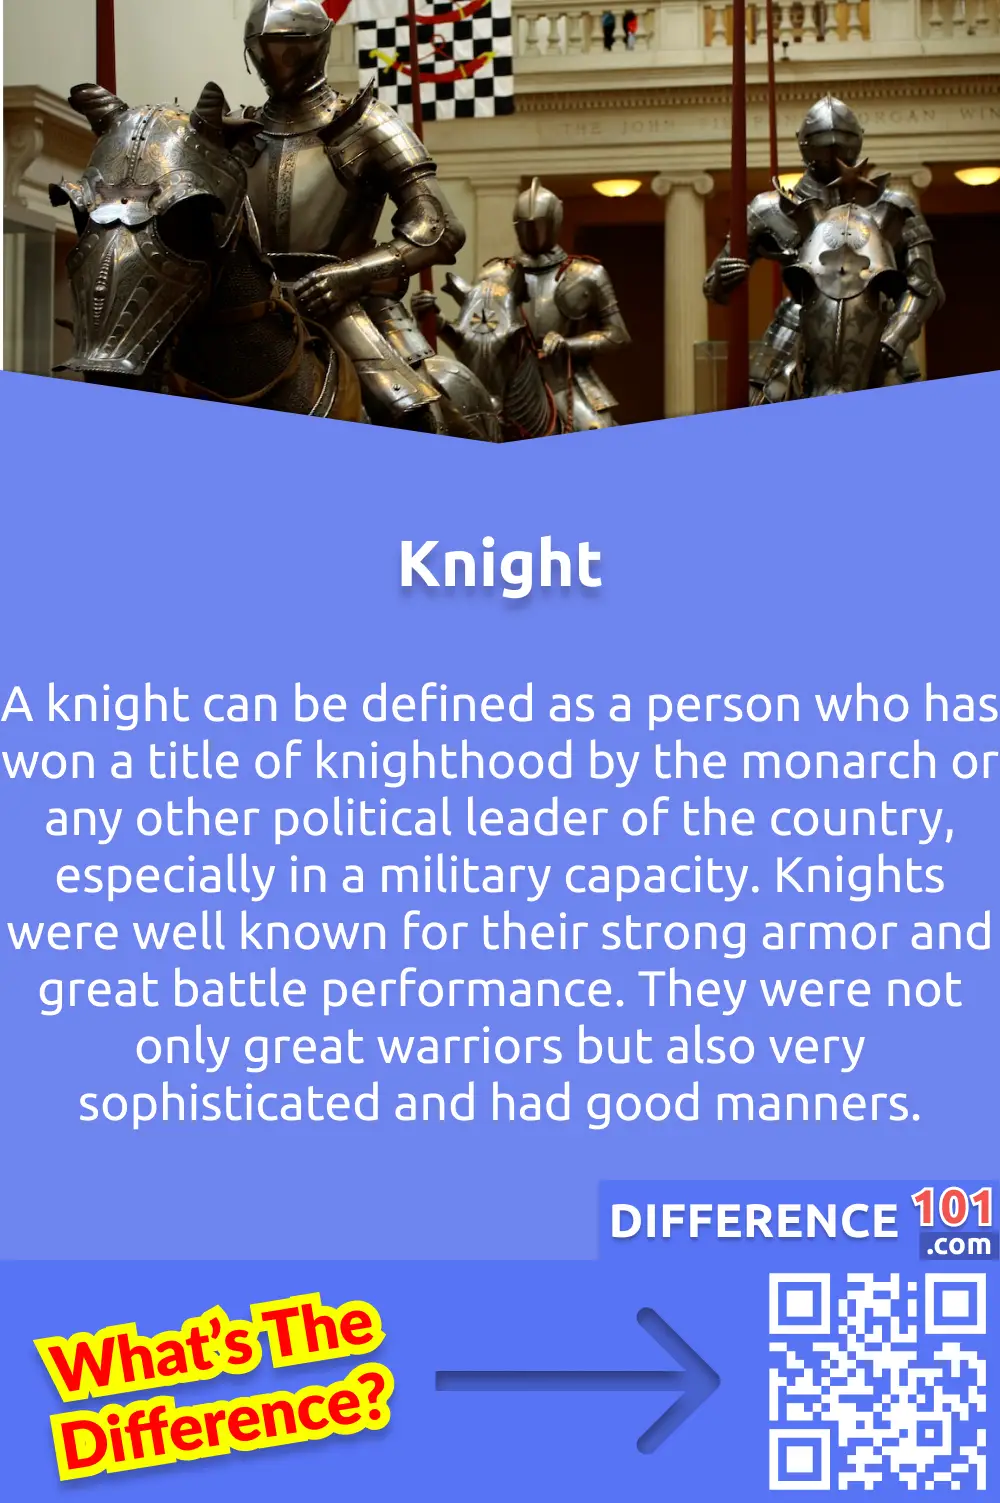 What is Knight? A knight can be defined as a person who has won a title of knighthood by the monarch or any other political leader of the country, especially in a military capacity. Knights were well known for their strong armor and great battle performance. They were not only great warriors but also very sophisticated and had good manners. 